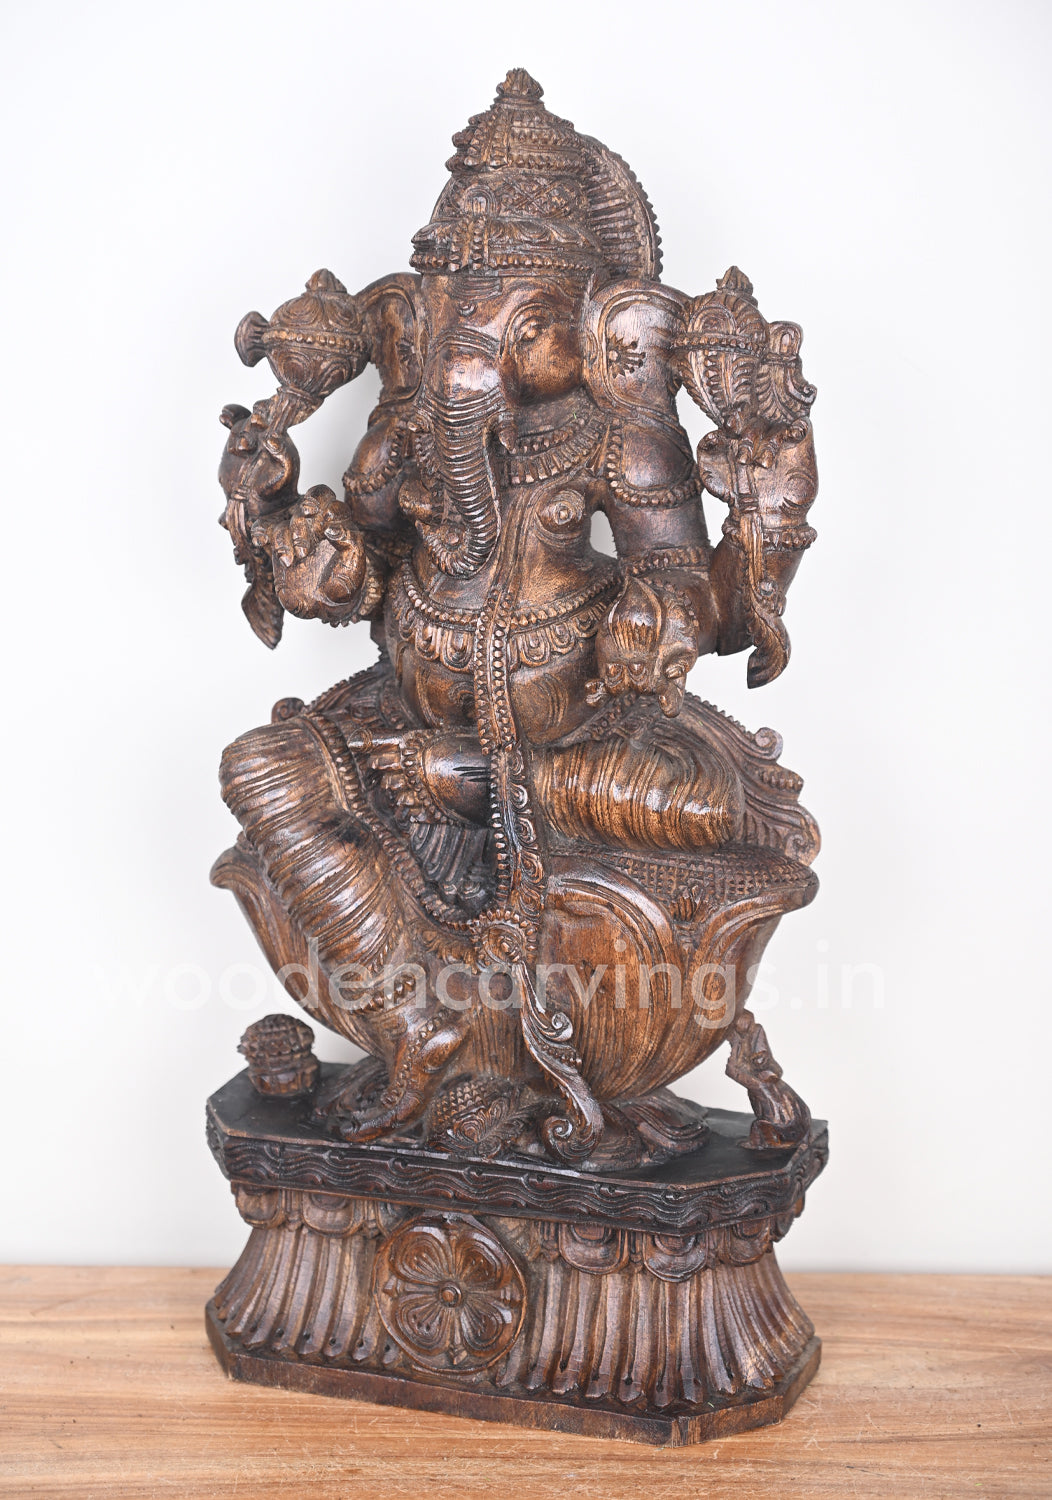 Prosperity Lord Ganesha Simply Seated on Lotus Wooden Sculpture 25"